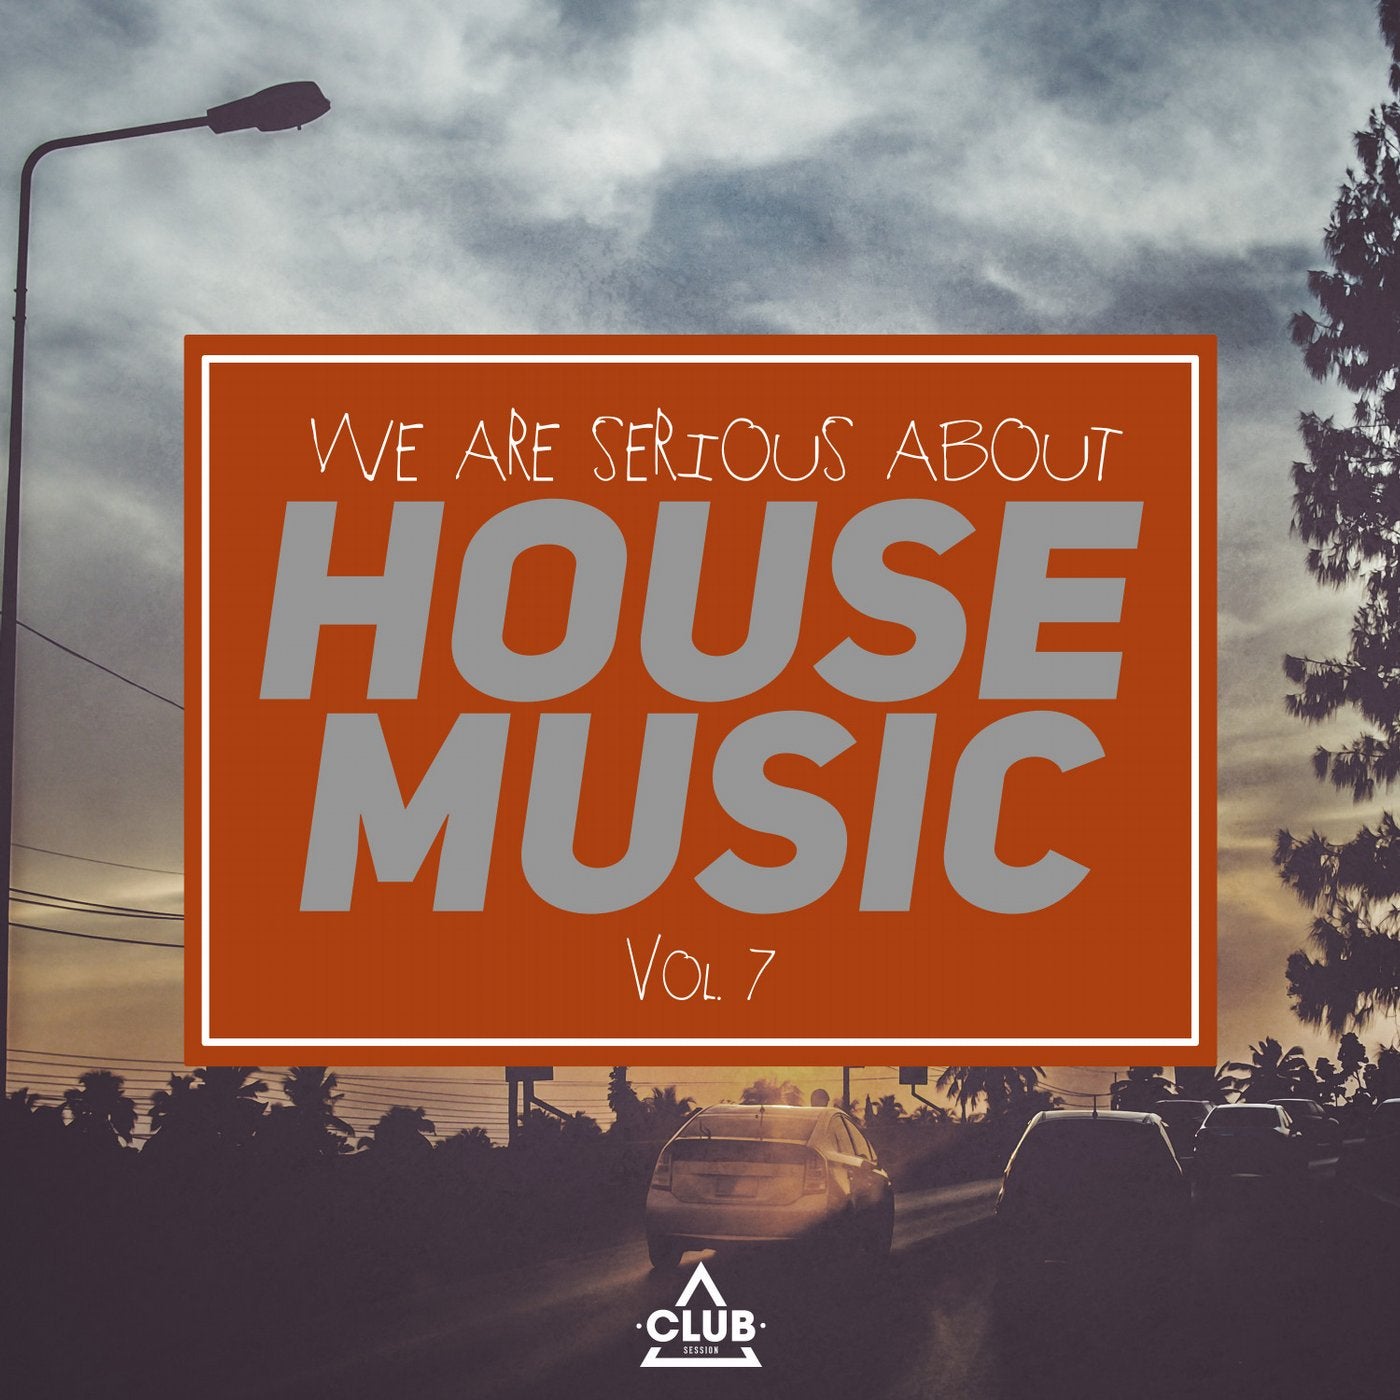 We Are Serious About House Music Vol. 7